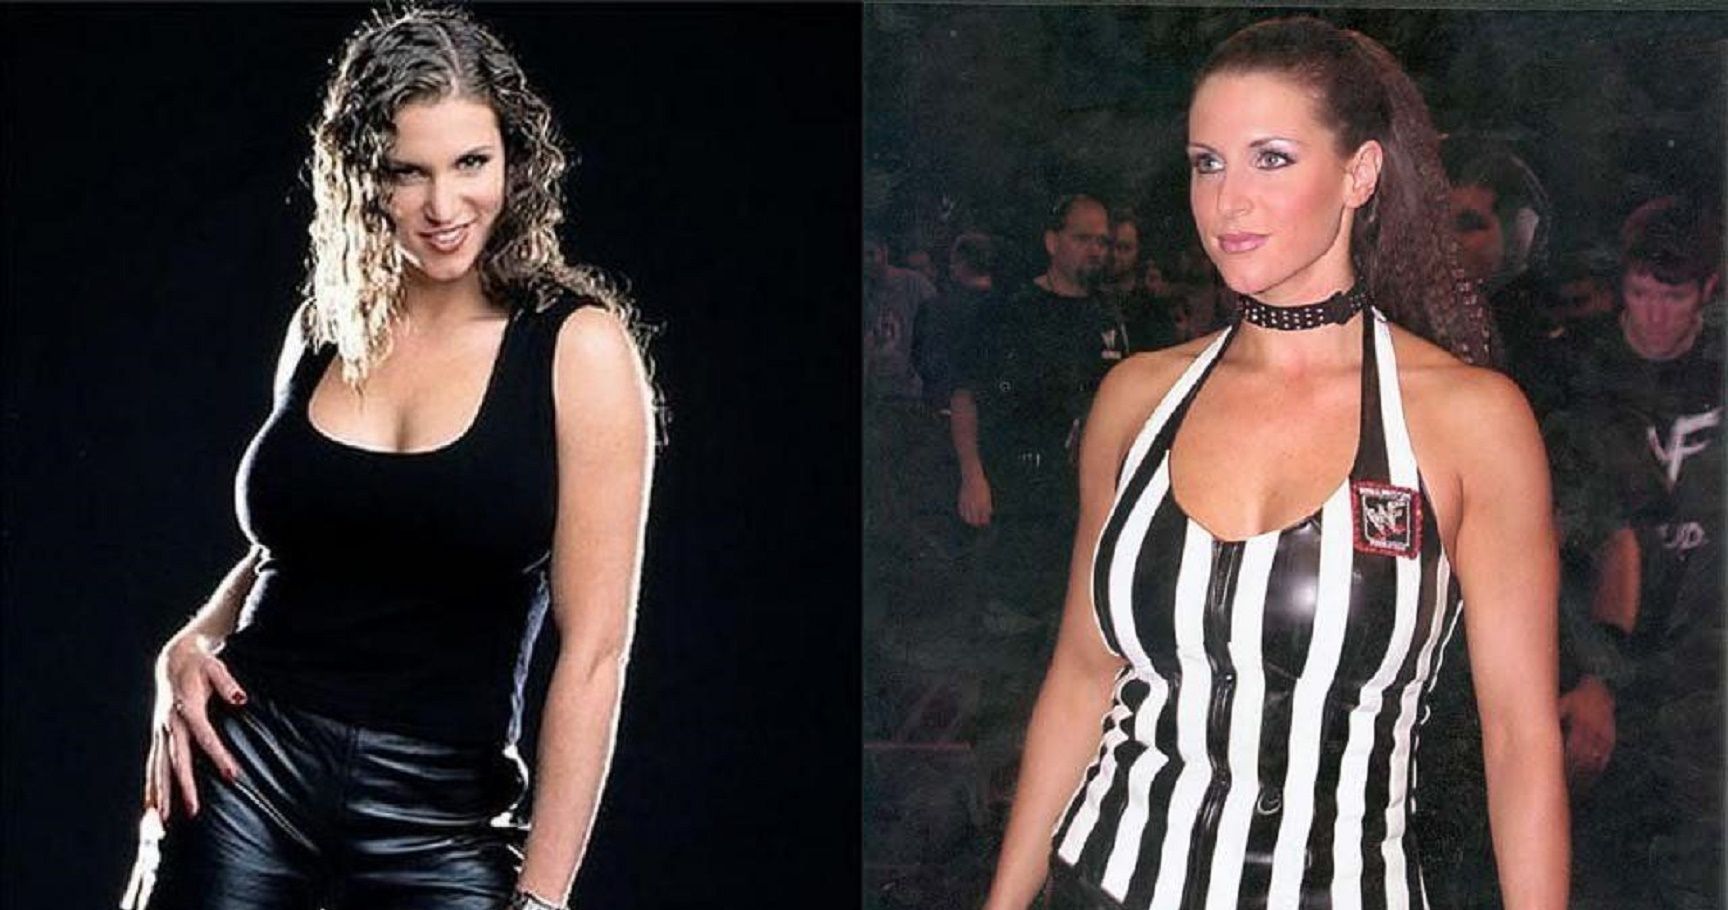 Stephanie Mcmohon Free Porn Videos - Top 20 Hot Pictures of Stephanie McMahon You NEED to See